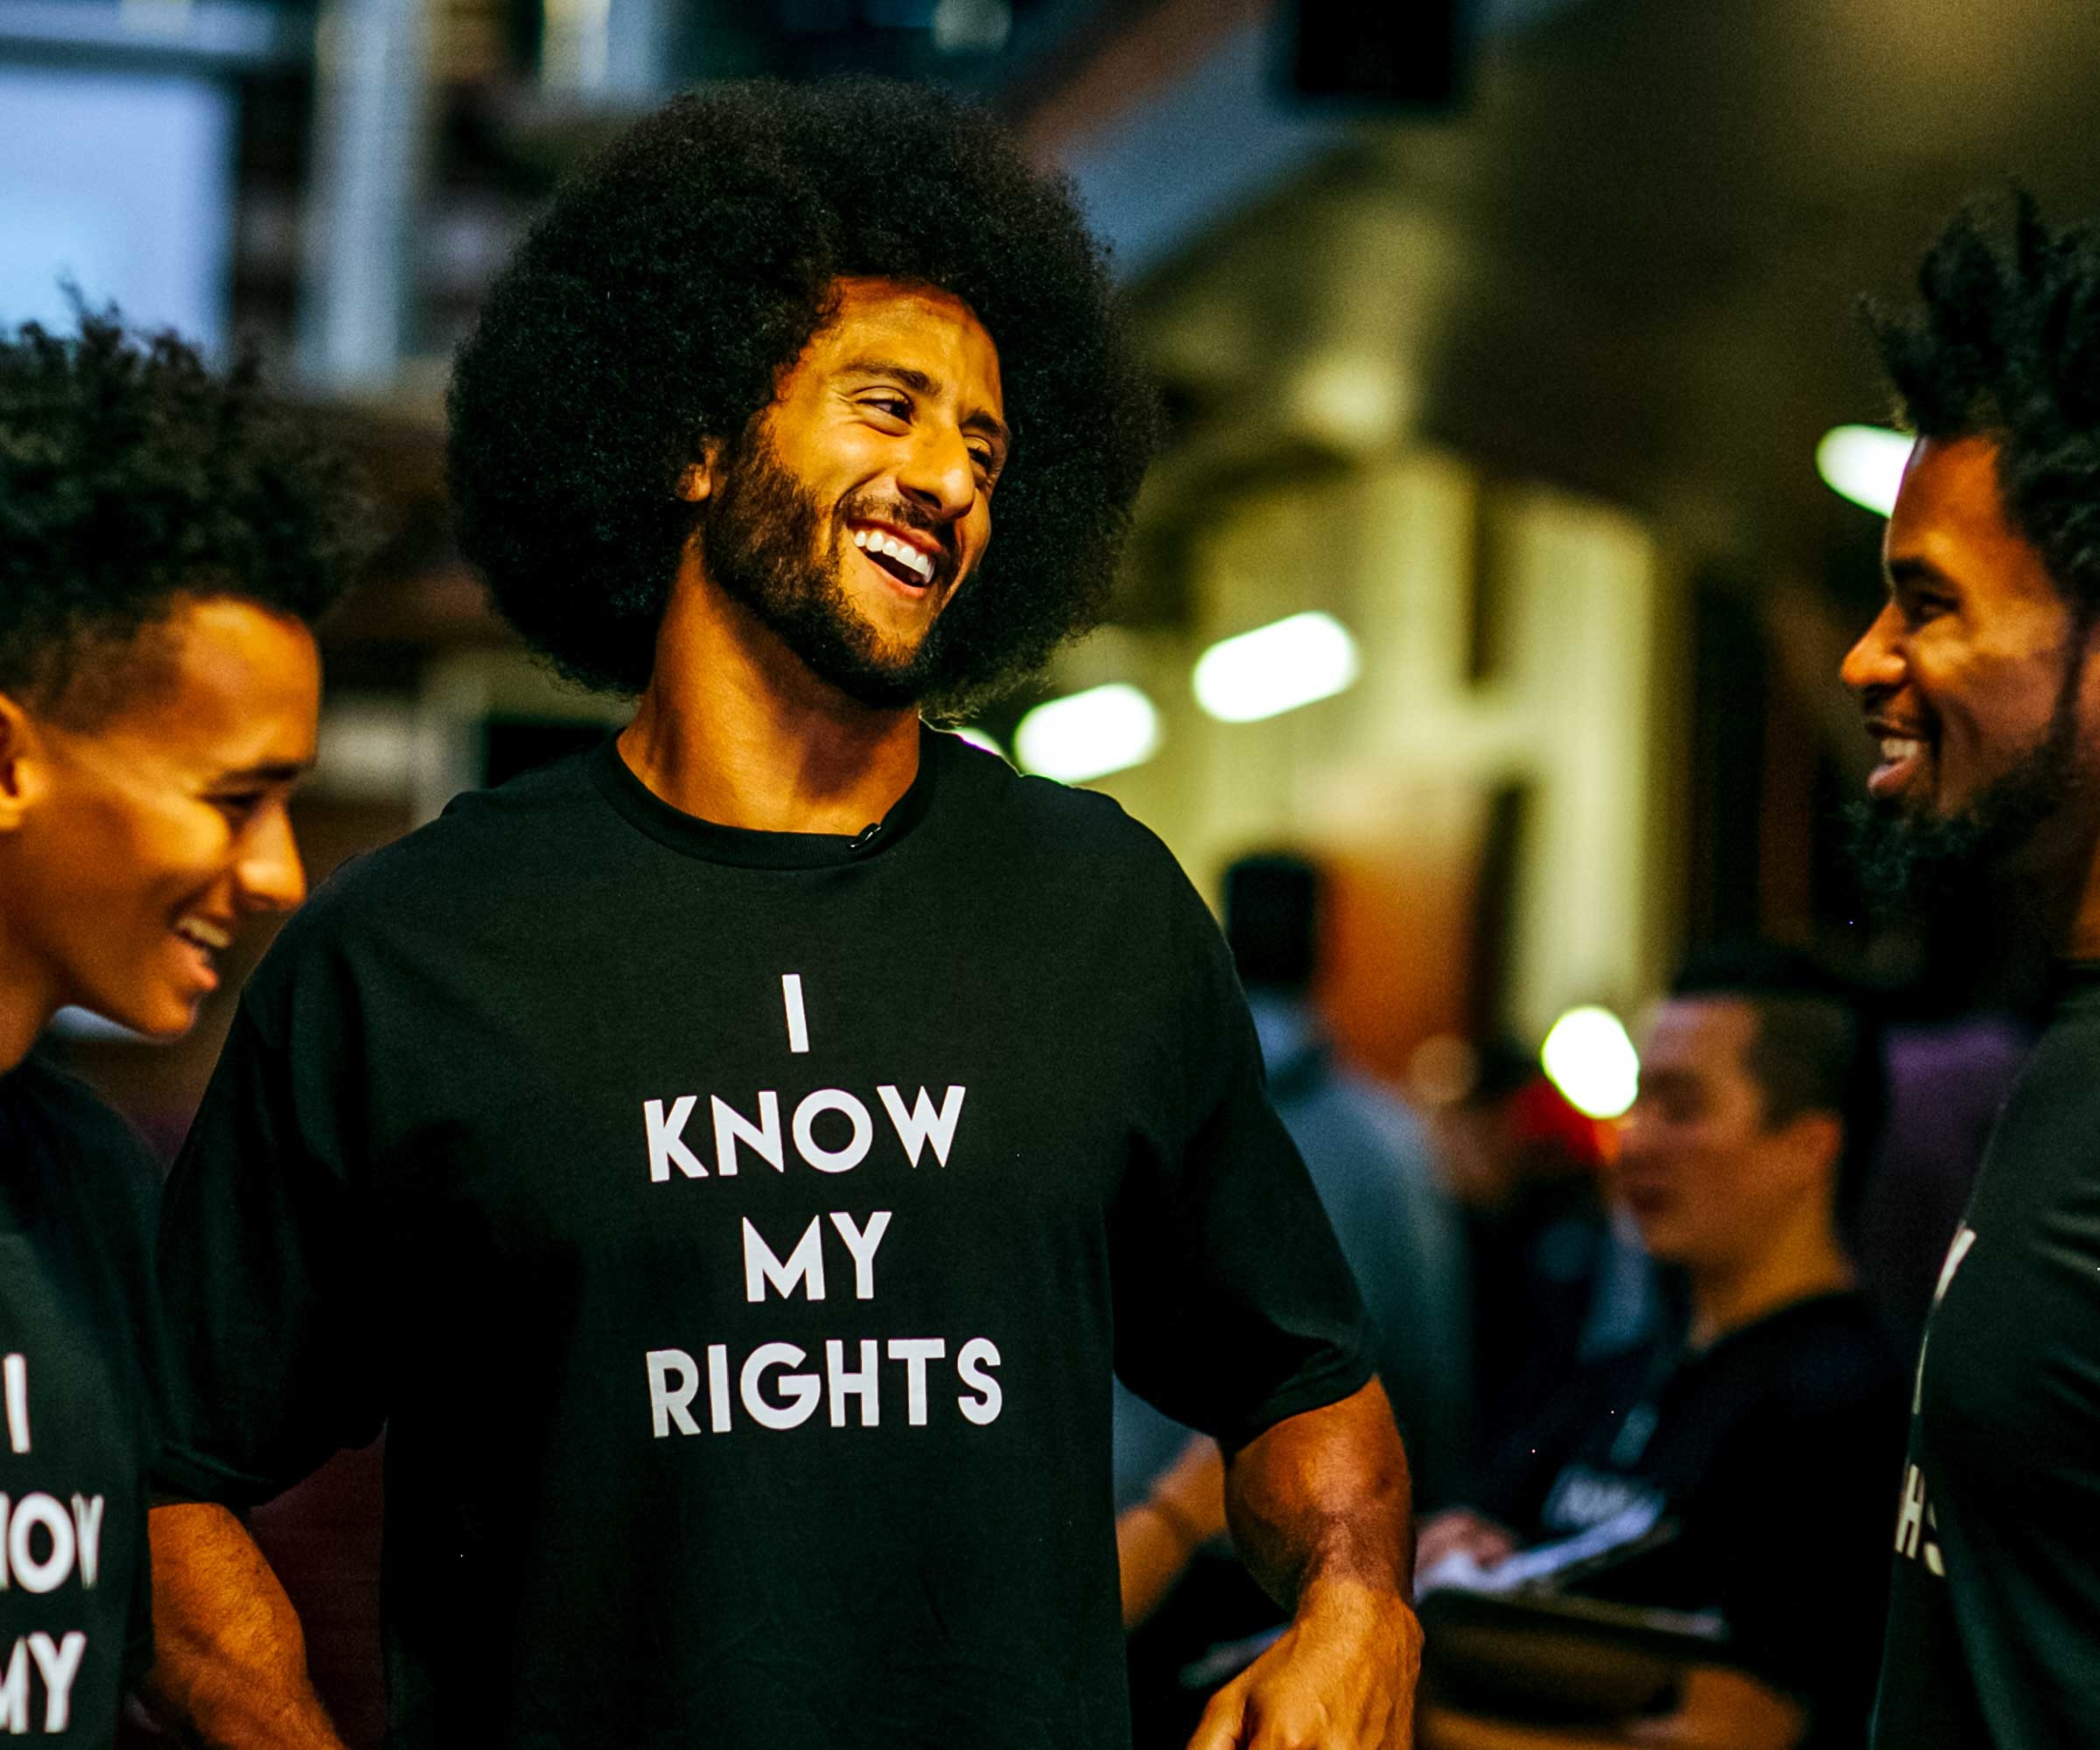 Activist and former NFL quarterback Colin Kaepernick appears at an Oakland, CA event held to educate youth about their rights. © Katrina Britney Davis